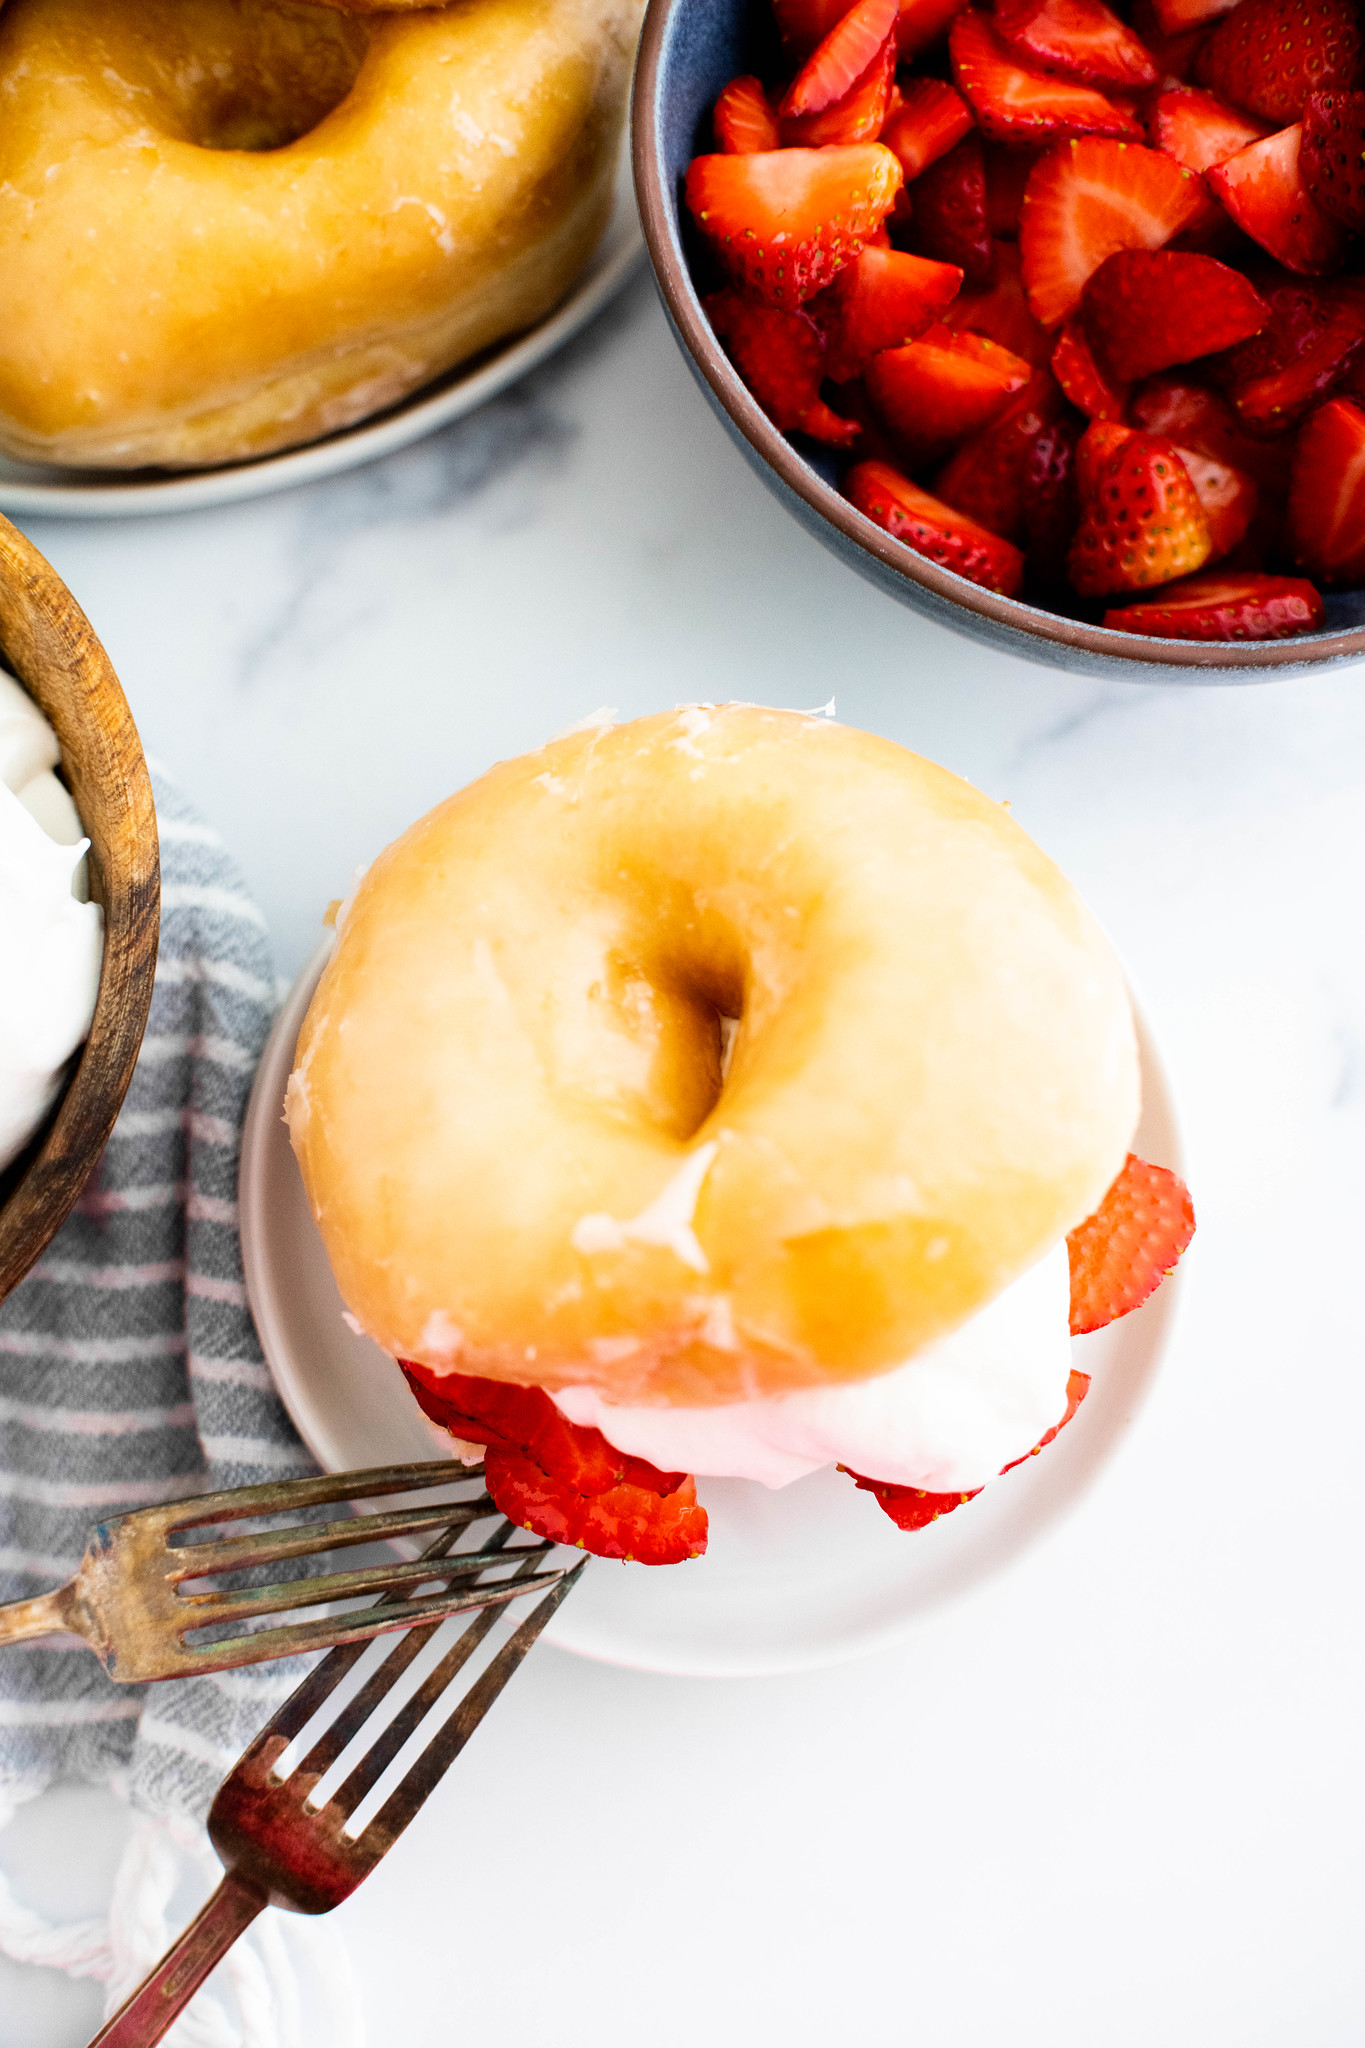 Glazed donut sliced in half filled with macerated strawberries and homemade whipped cream. On a white round plate with a bowl of strawberries in the background and a tower of glazed donuts.